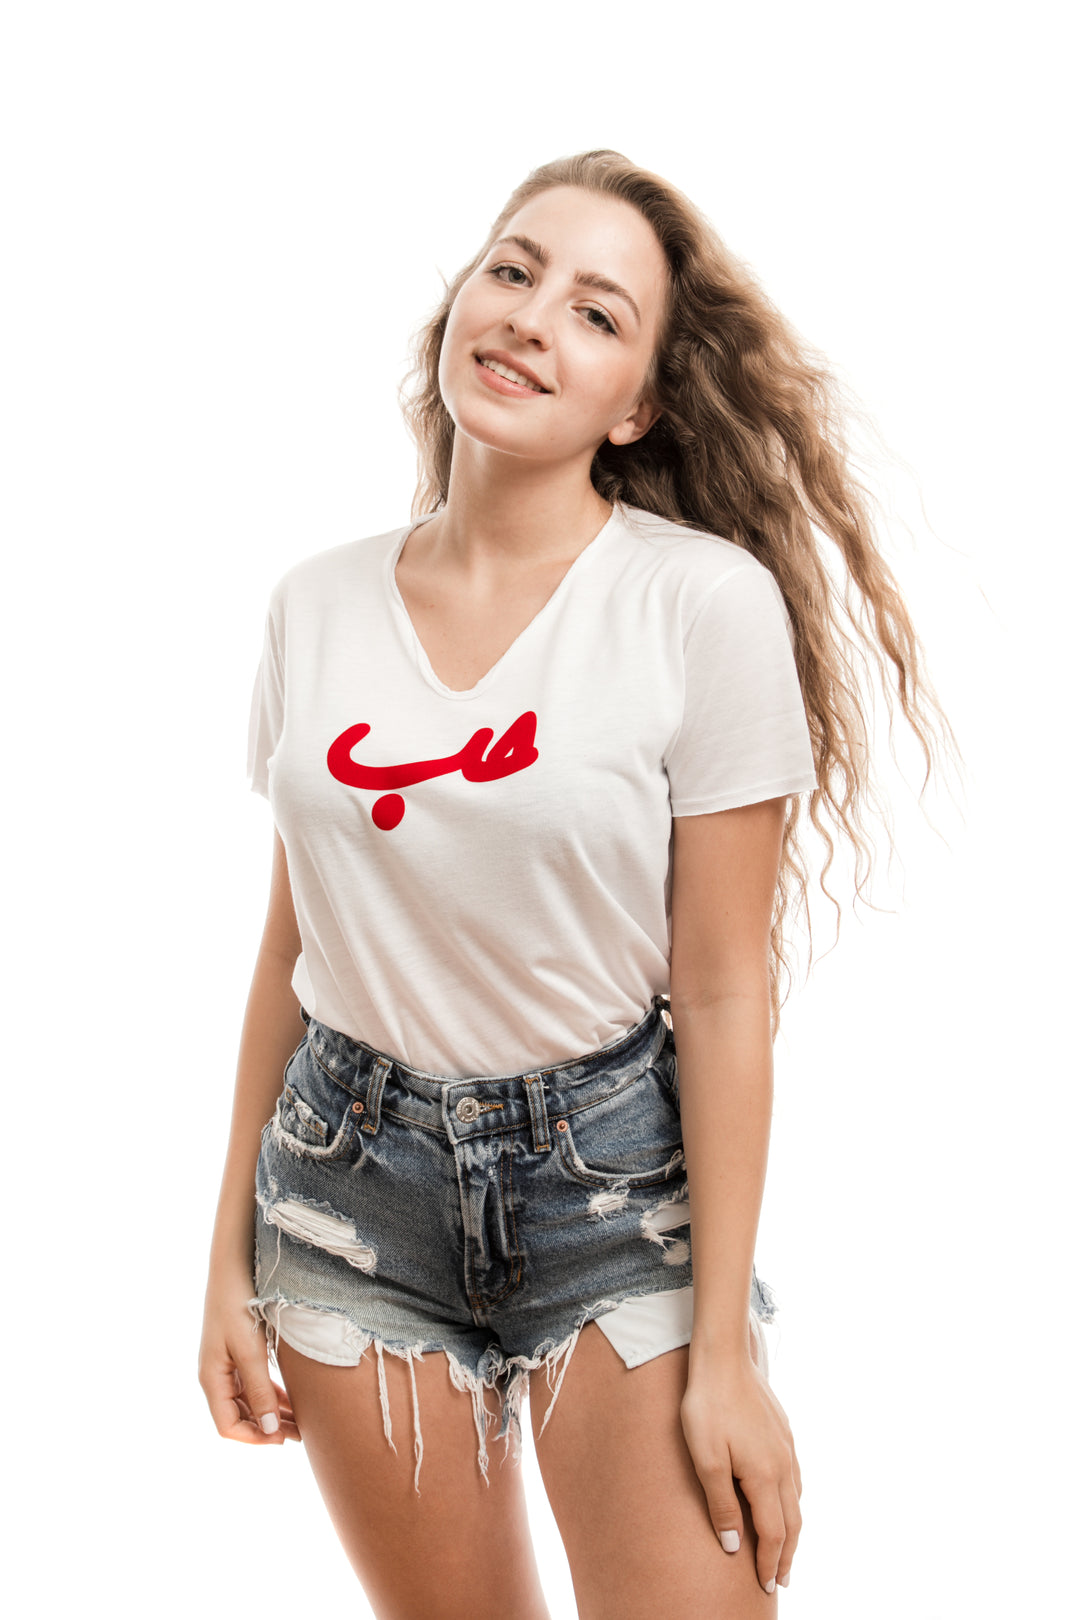 Young adult female wearing white T-shirt with Hobb written in Arabic حب and printed in red velvet in the center of the T-shirt along with blue jeans shorts.